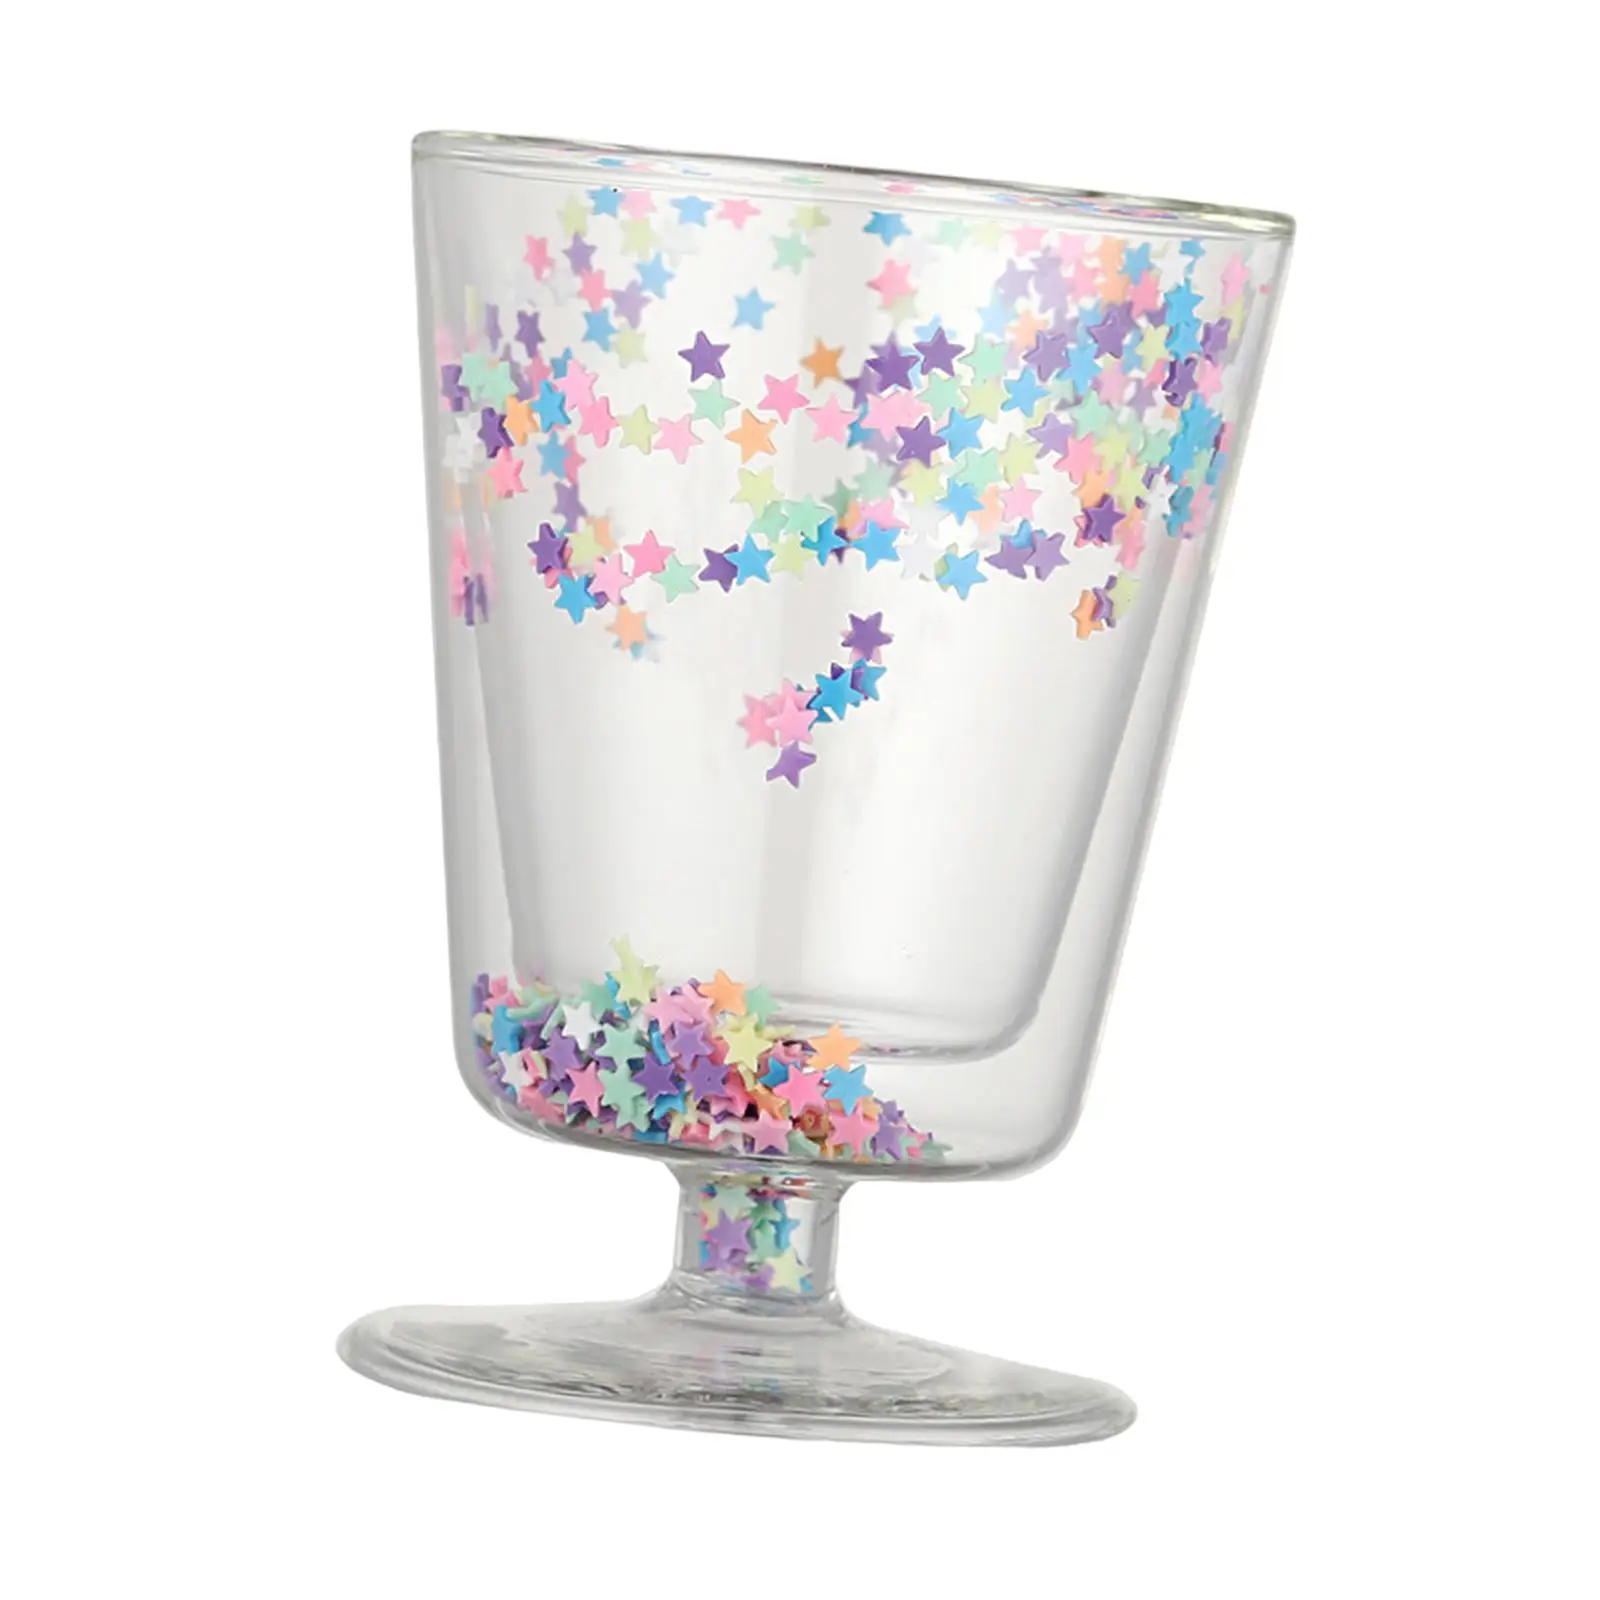 Double Wall Coffee Cups Star Sequin Glass Cup Espresso Mugs Cappuccino Cups Drink Mug for Juice Cappuccinos Latte Coffee